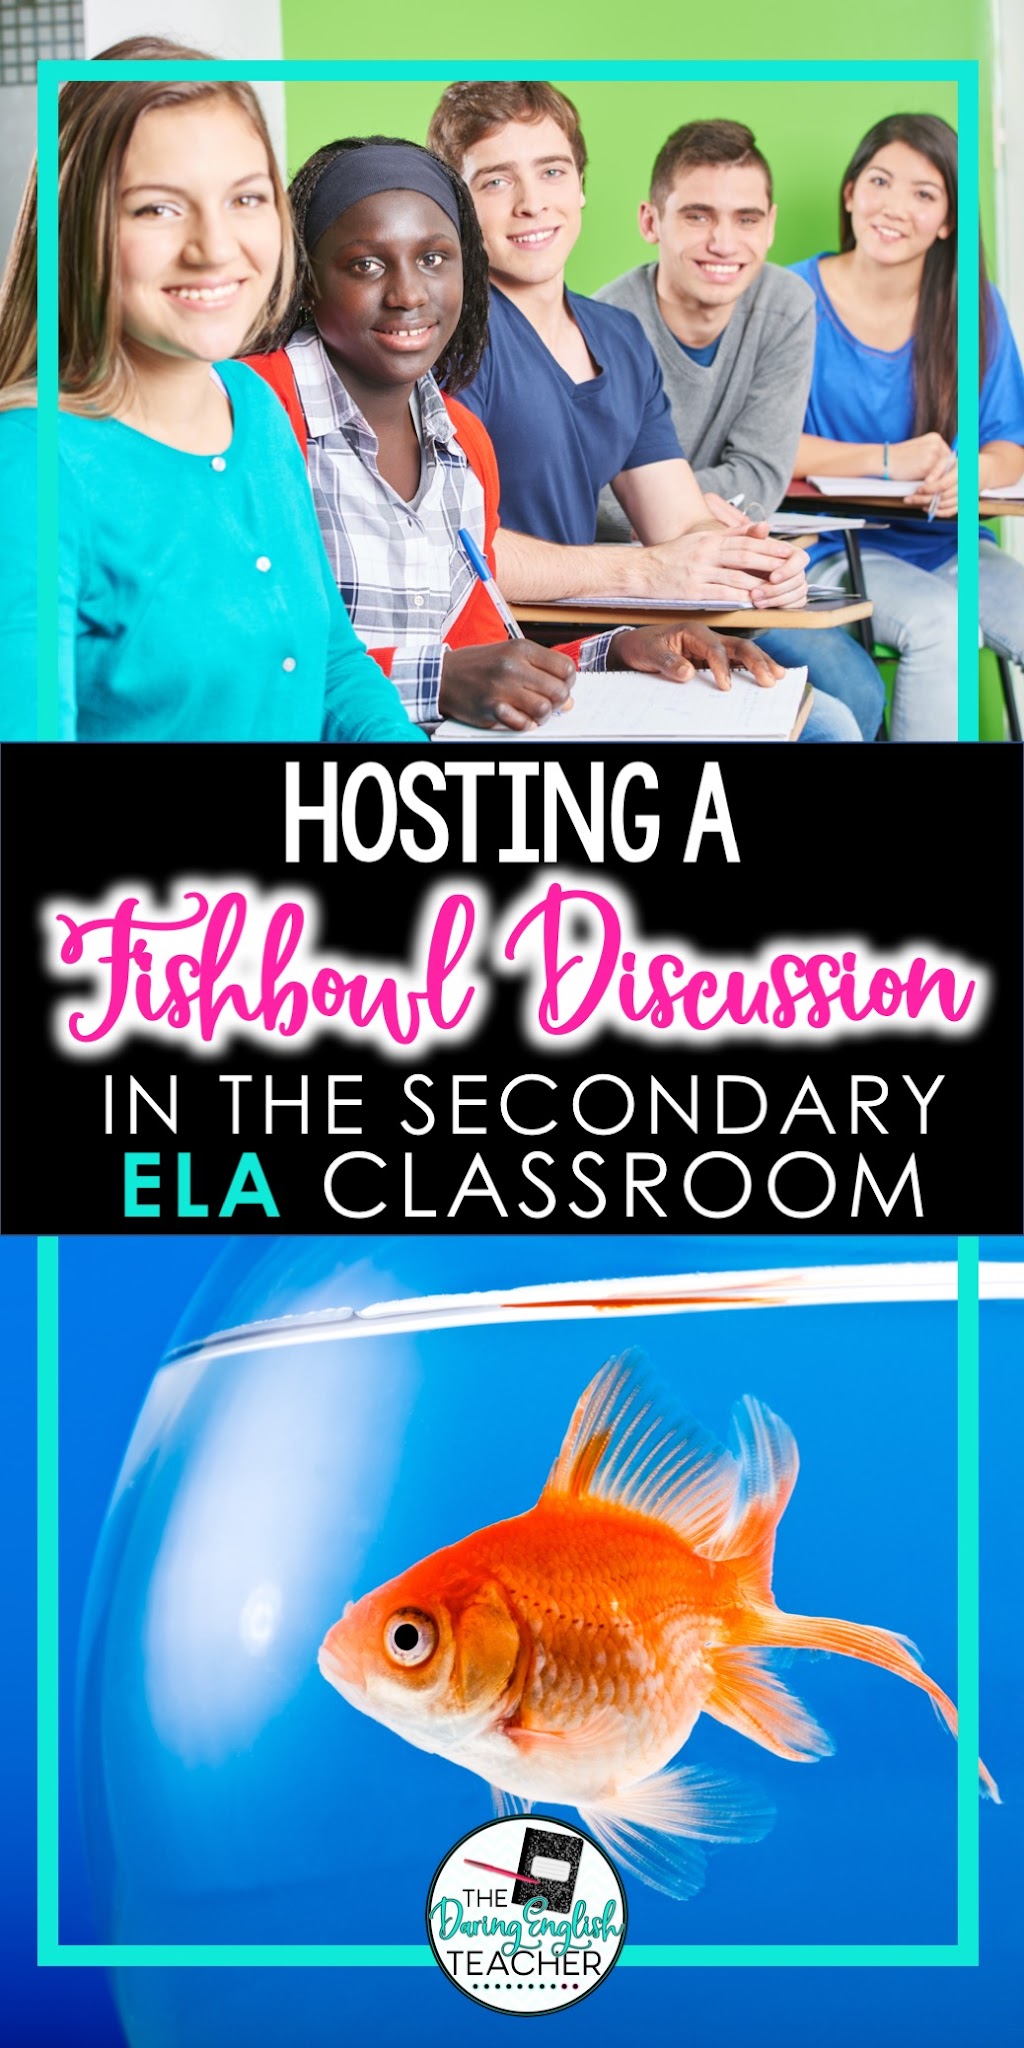 Engage your Students with Fishbowl Discussions in the Secondary ELA Classroom